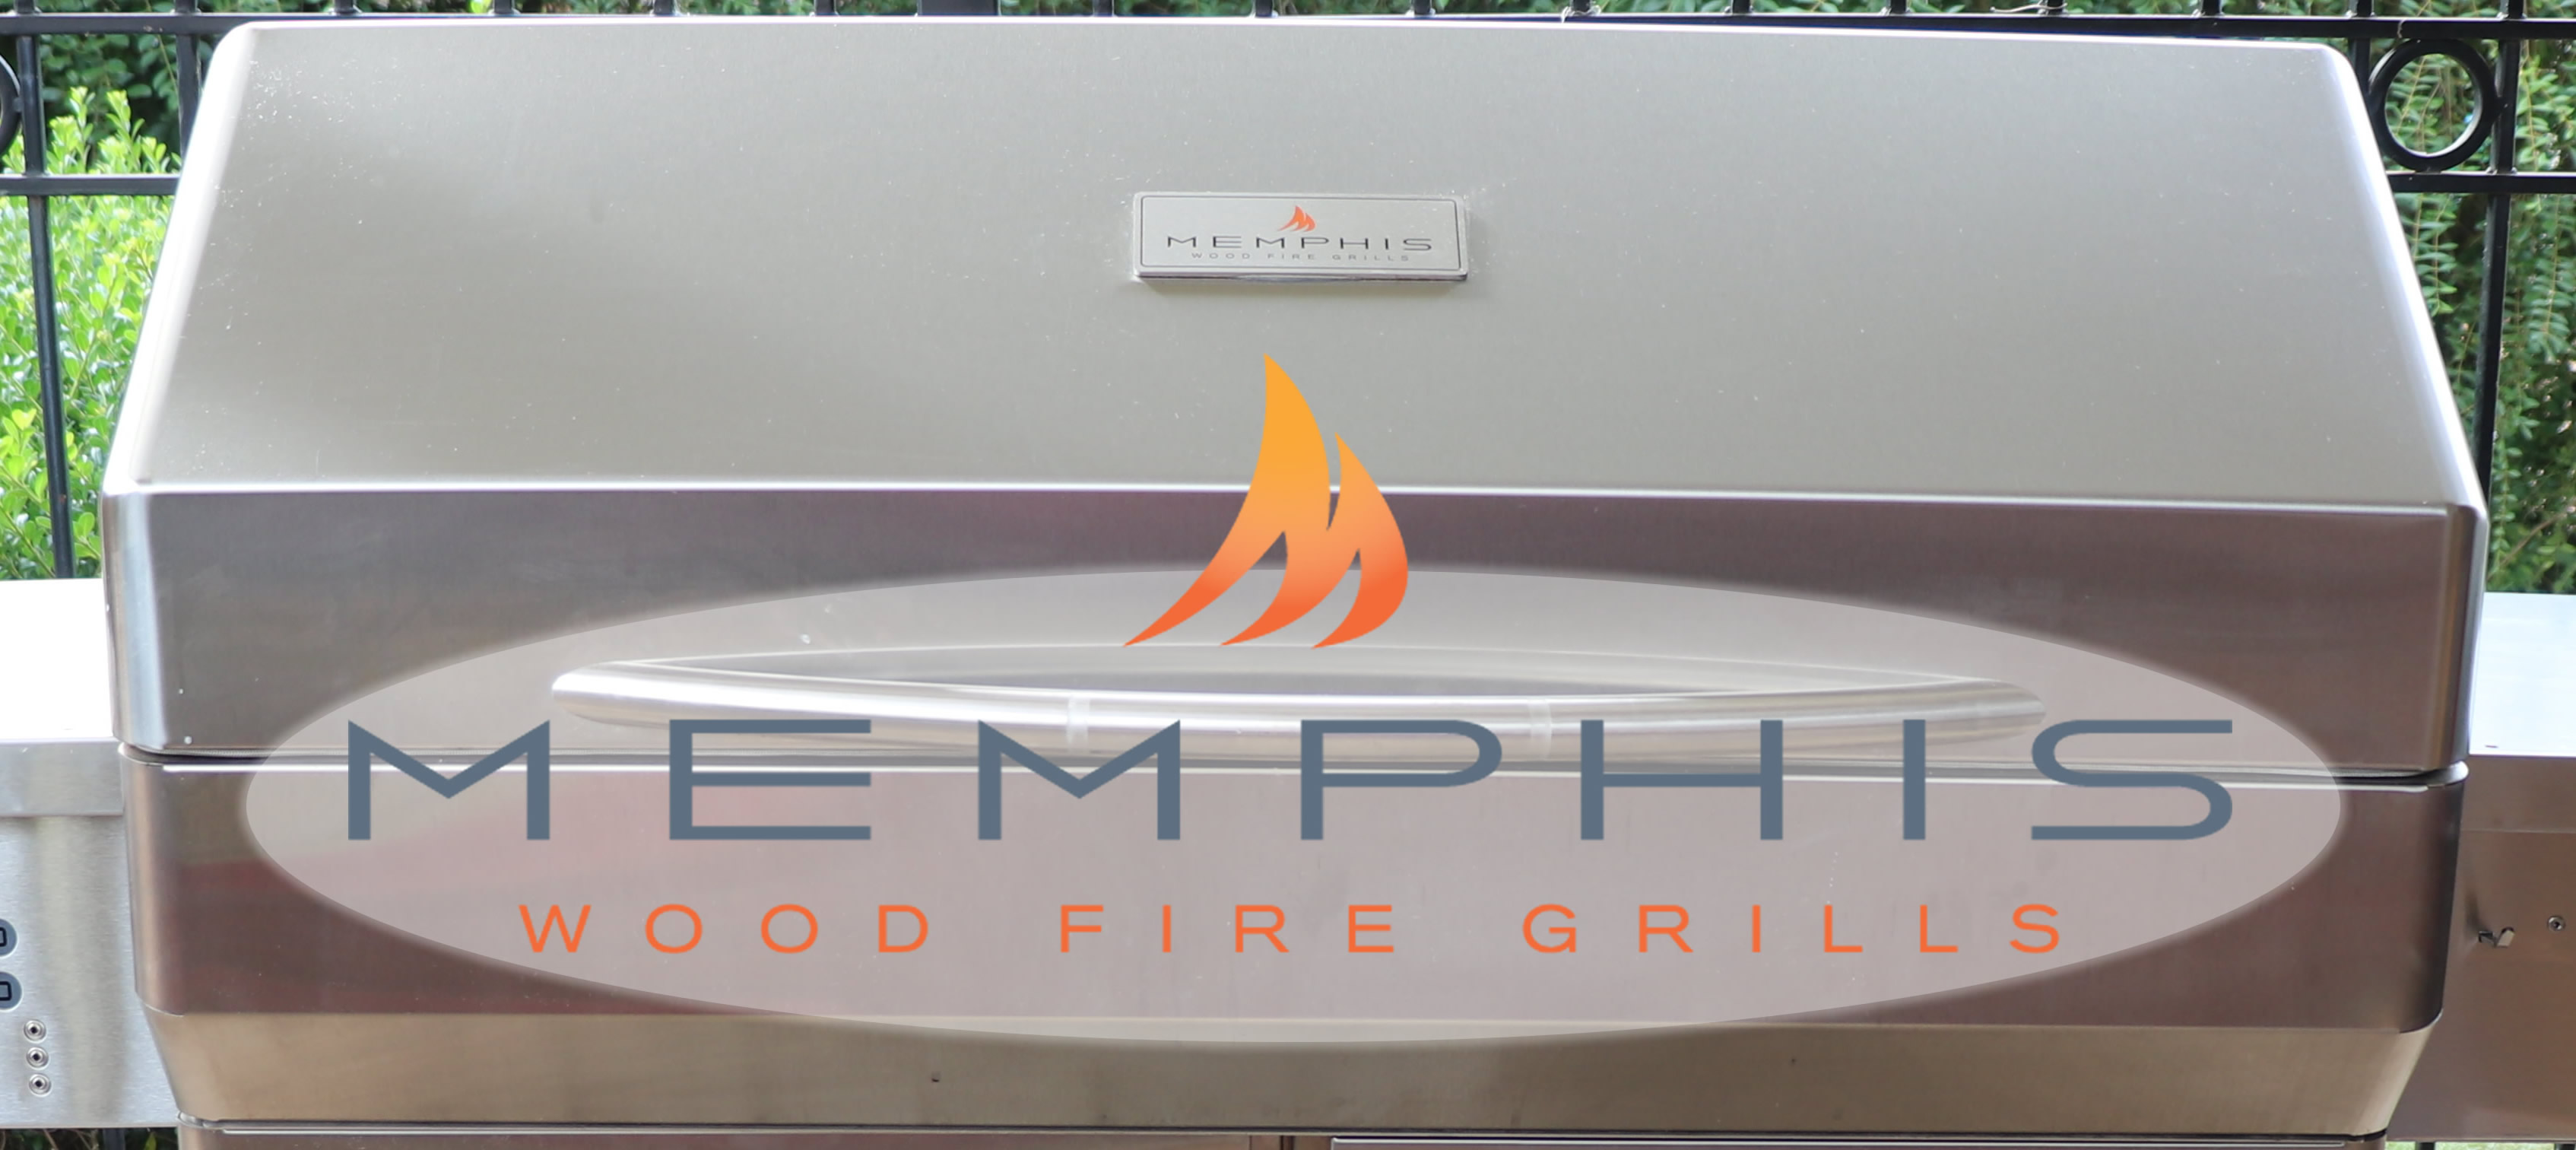 Grilling Guide: How to Smoke Meat on the Grill  Pellet Grill Tips –  Memphis Wood Fire Grills